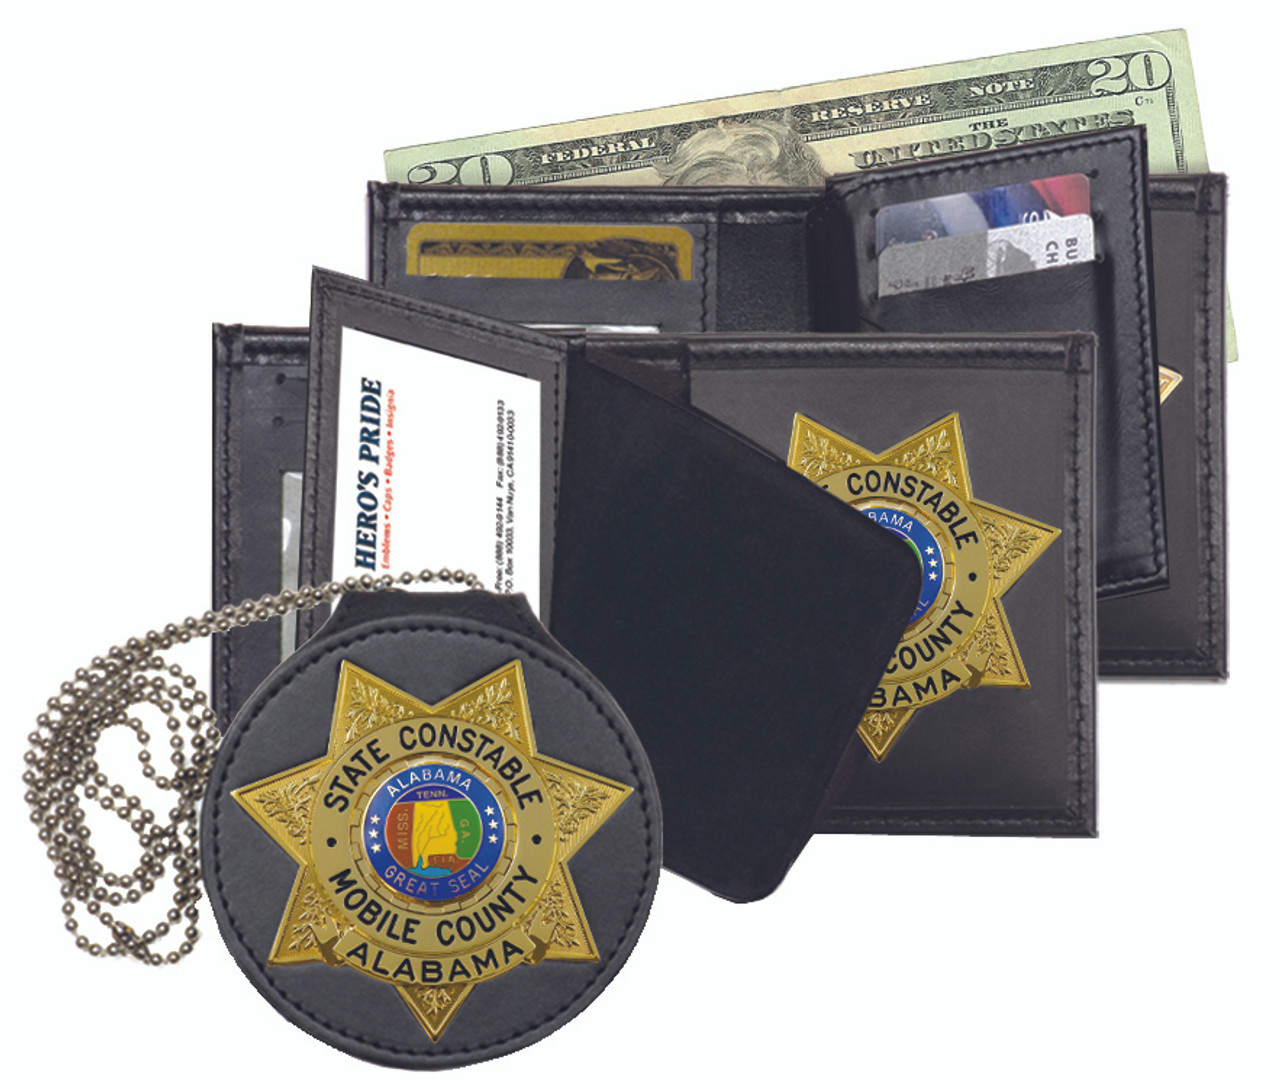 Perfect Fit County Sheriff Police Badge Wallet 6PT Star Fits Many